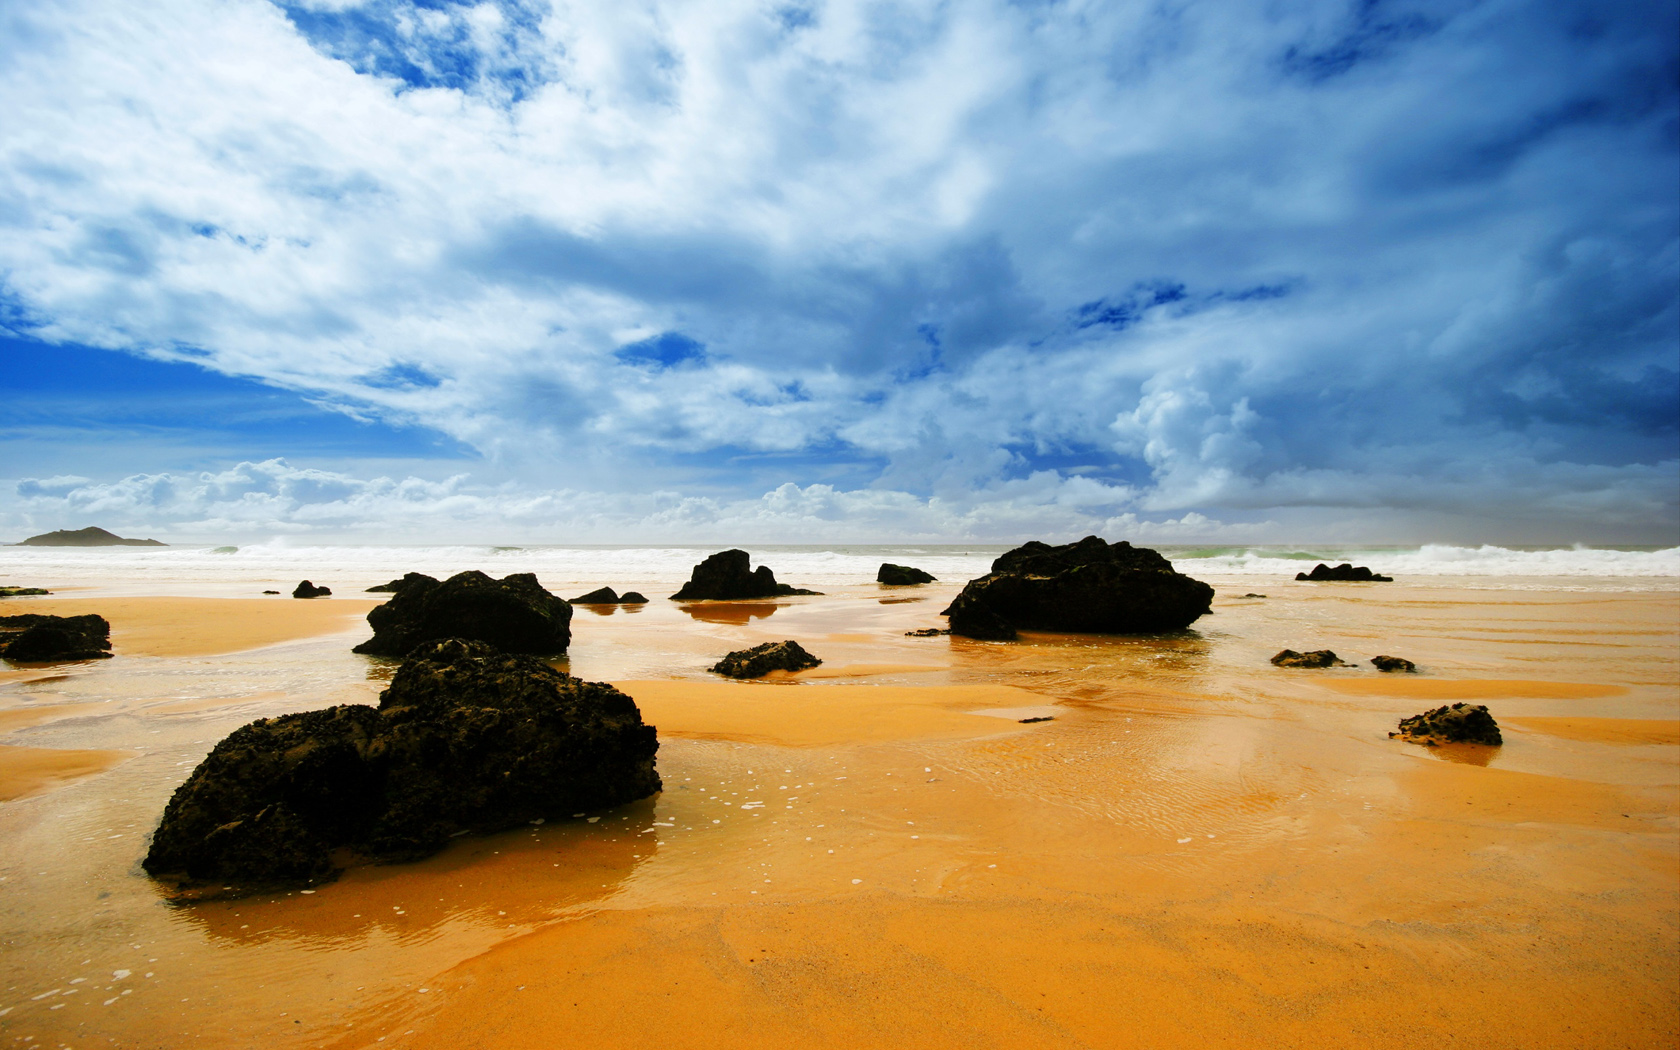 Scenic landscape view with a cloudy sky, sandy beach, and ocean waves.